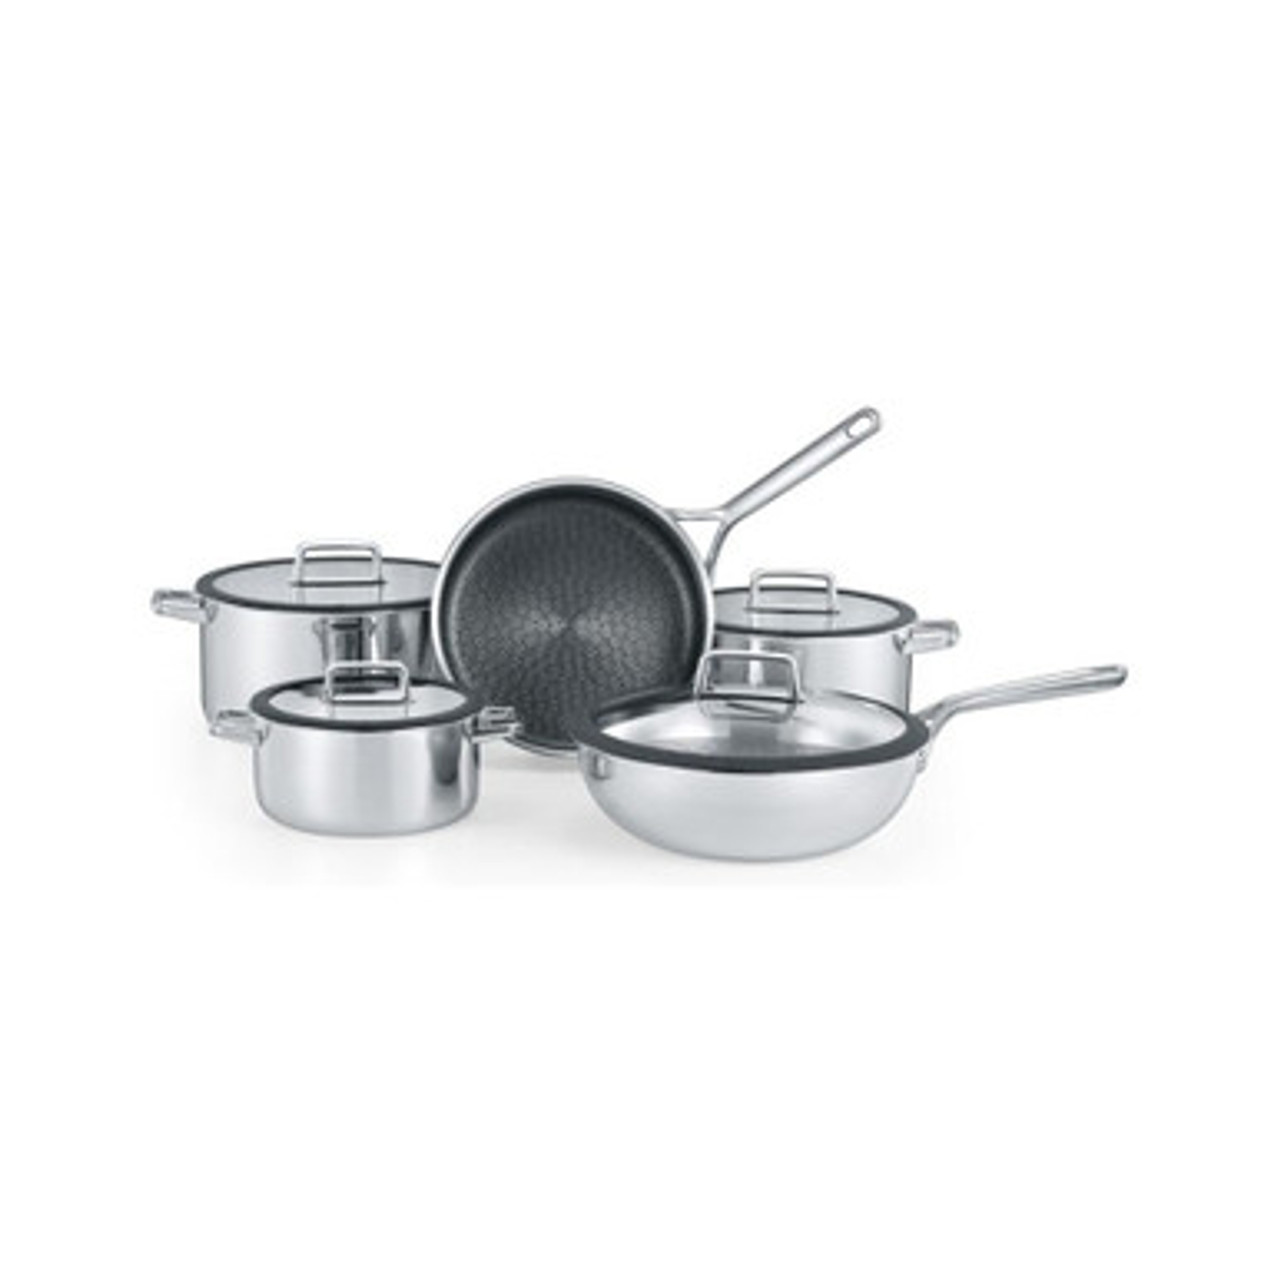 Arshia Stainless Cookware set 10pcs Steel Nonstick Duty Heavy